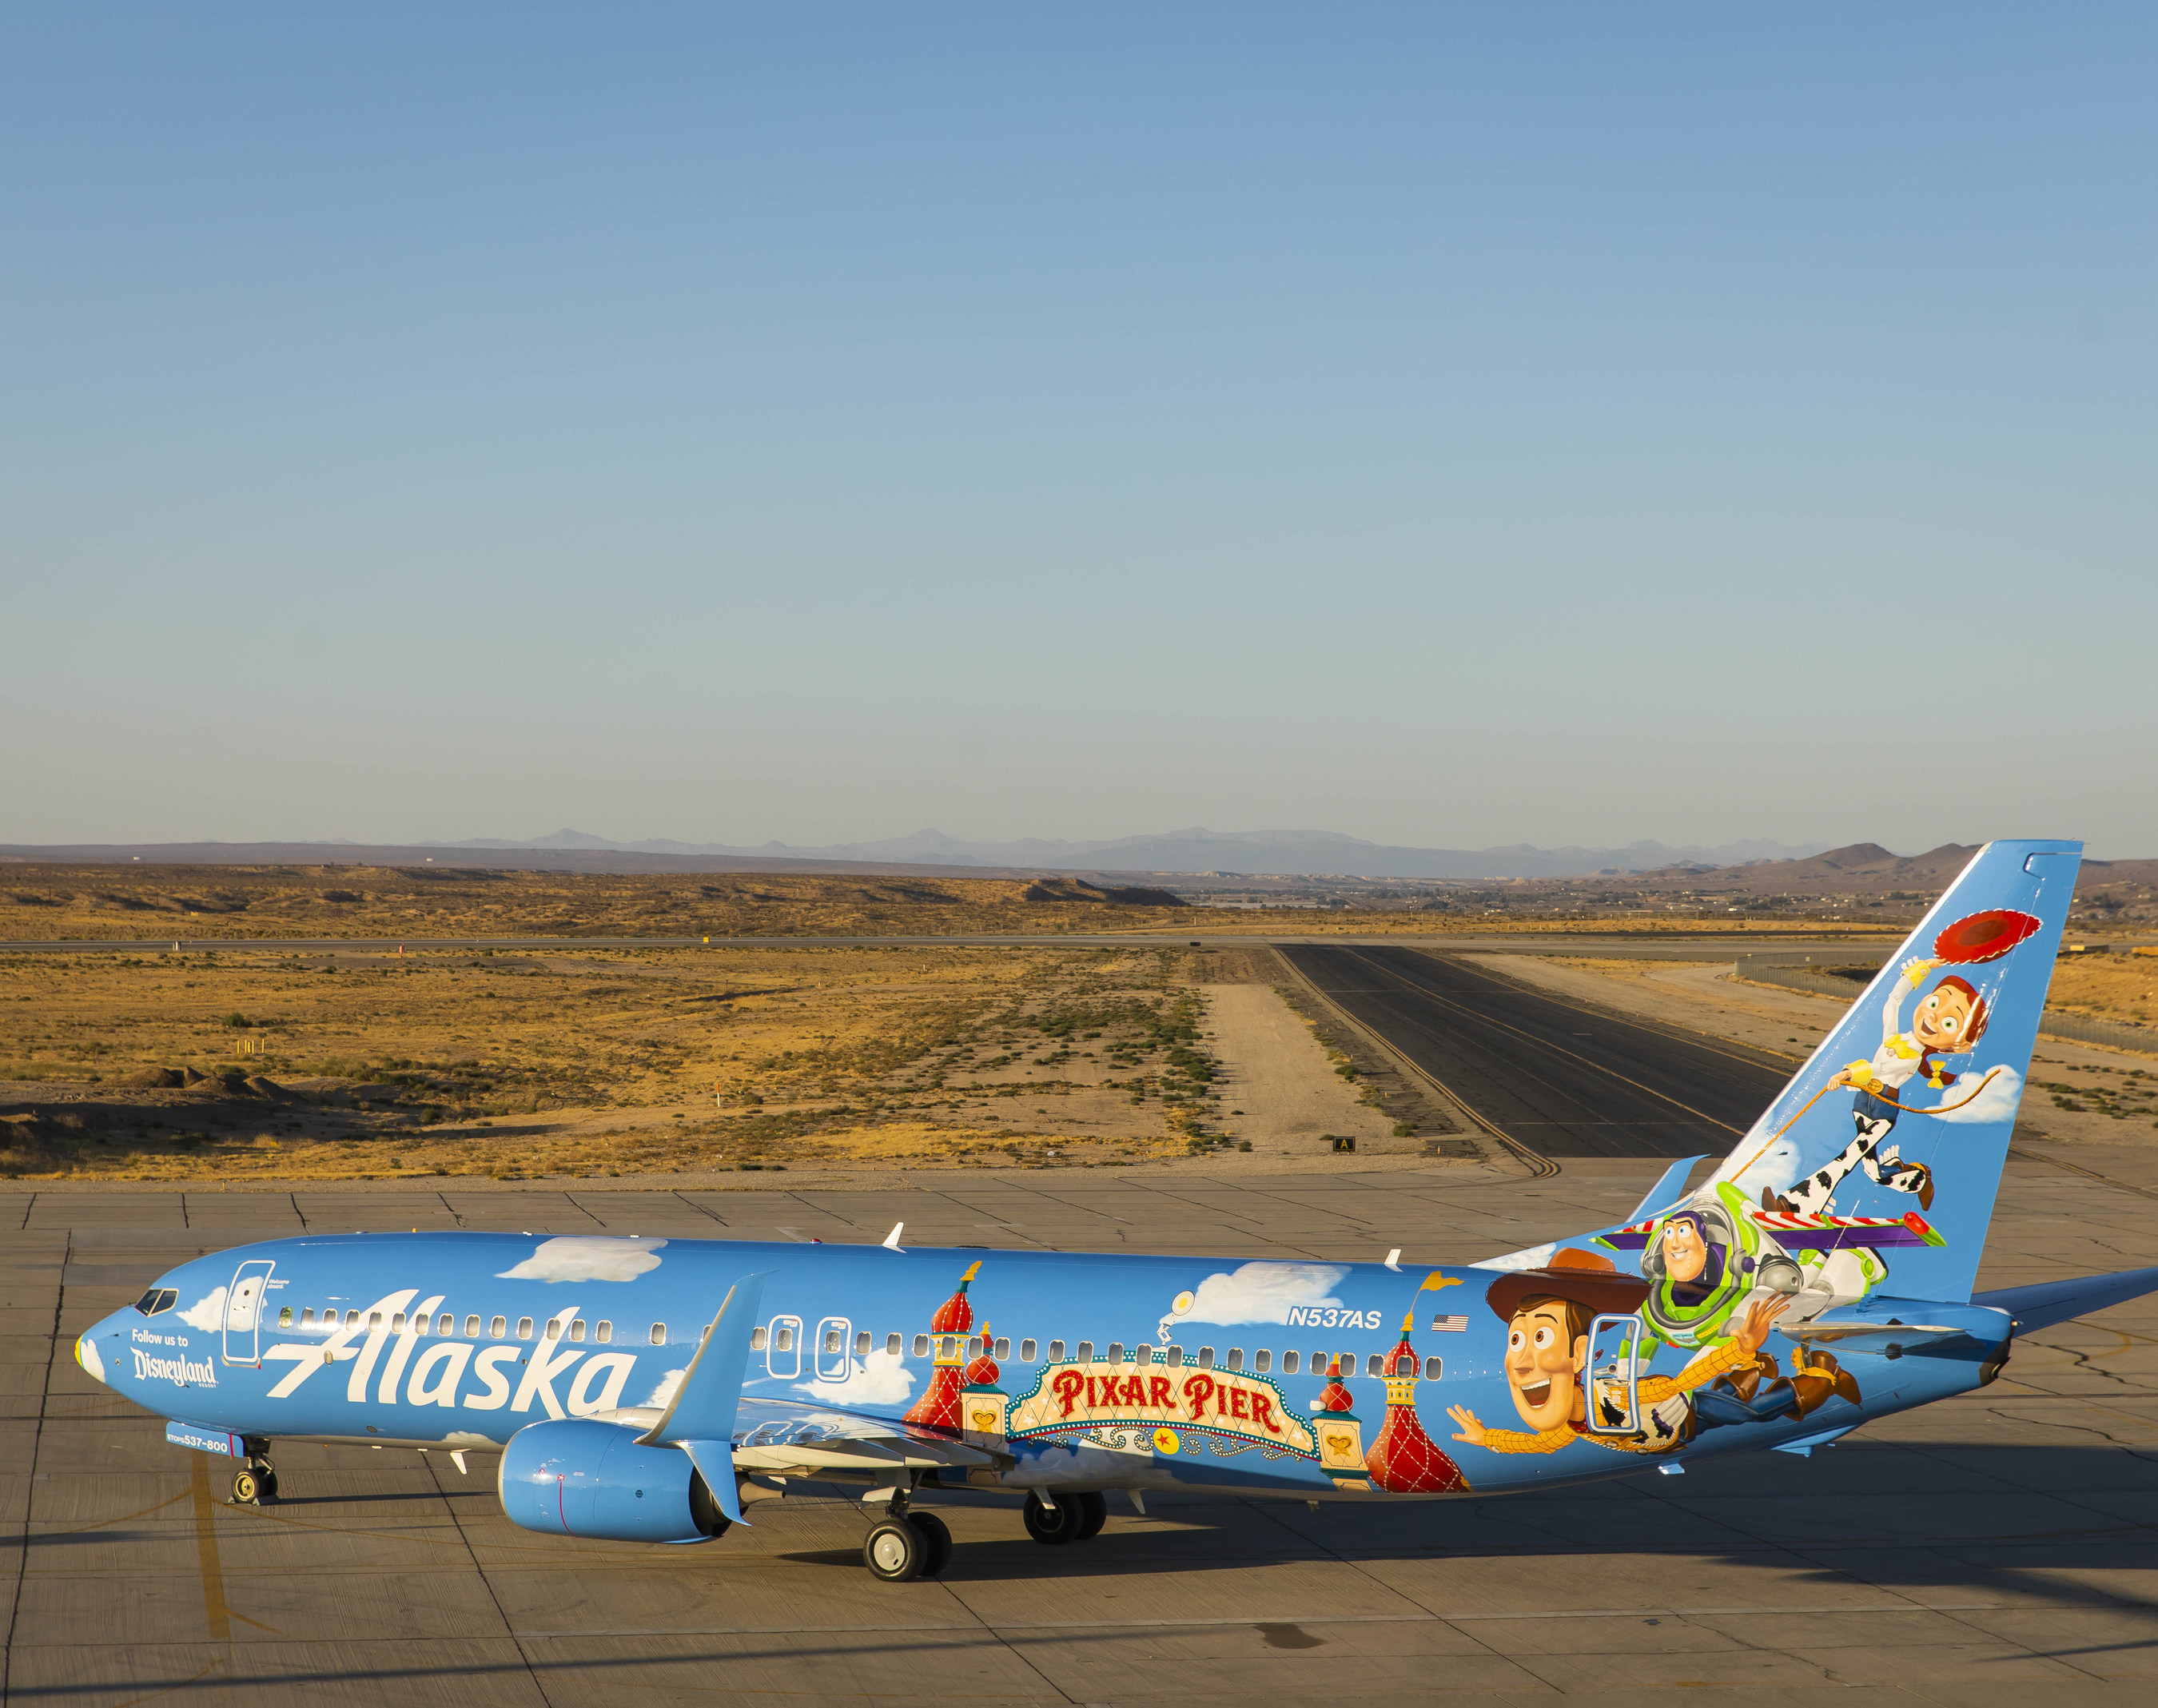 Alaska Airlines reveals its latest special-edition aircraft